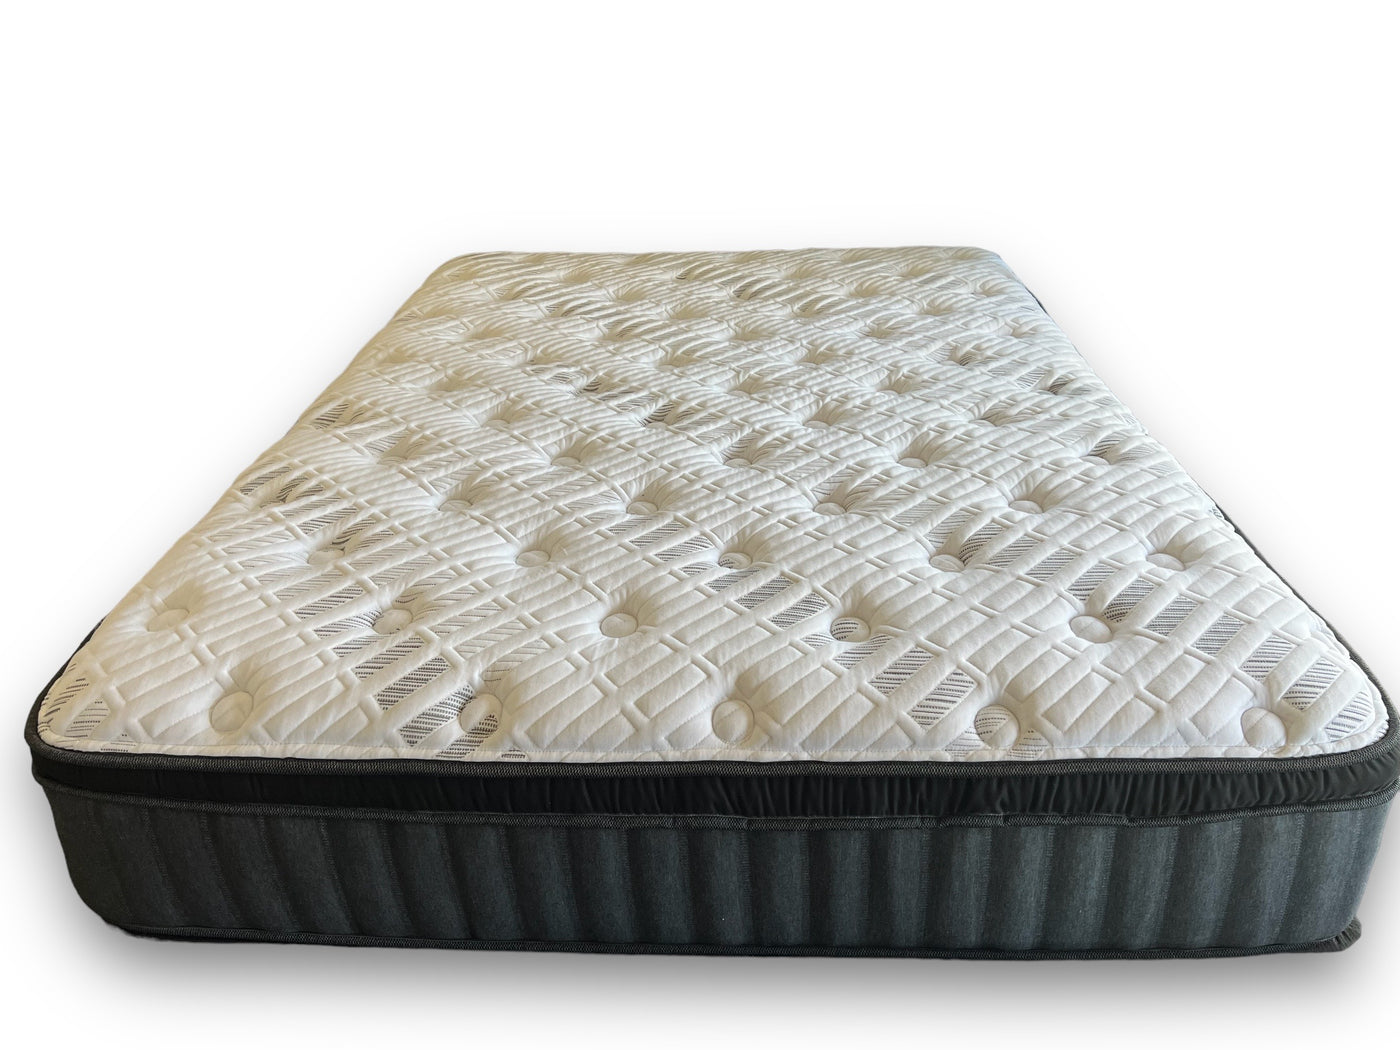 CLEARANCE Alicia  Euro Top Queen Mattress Only WHOLESALE PRICE ON FLOOR MODEL